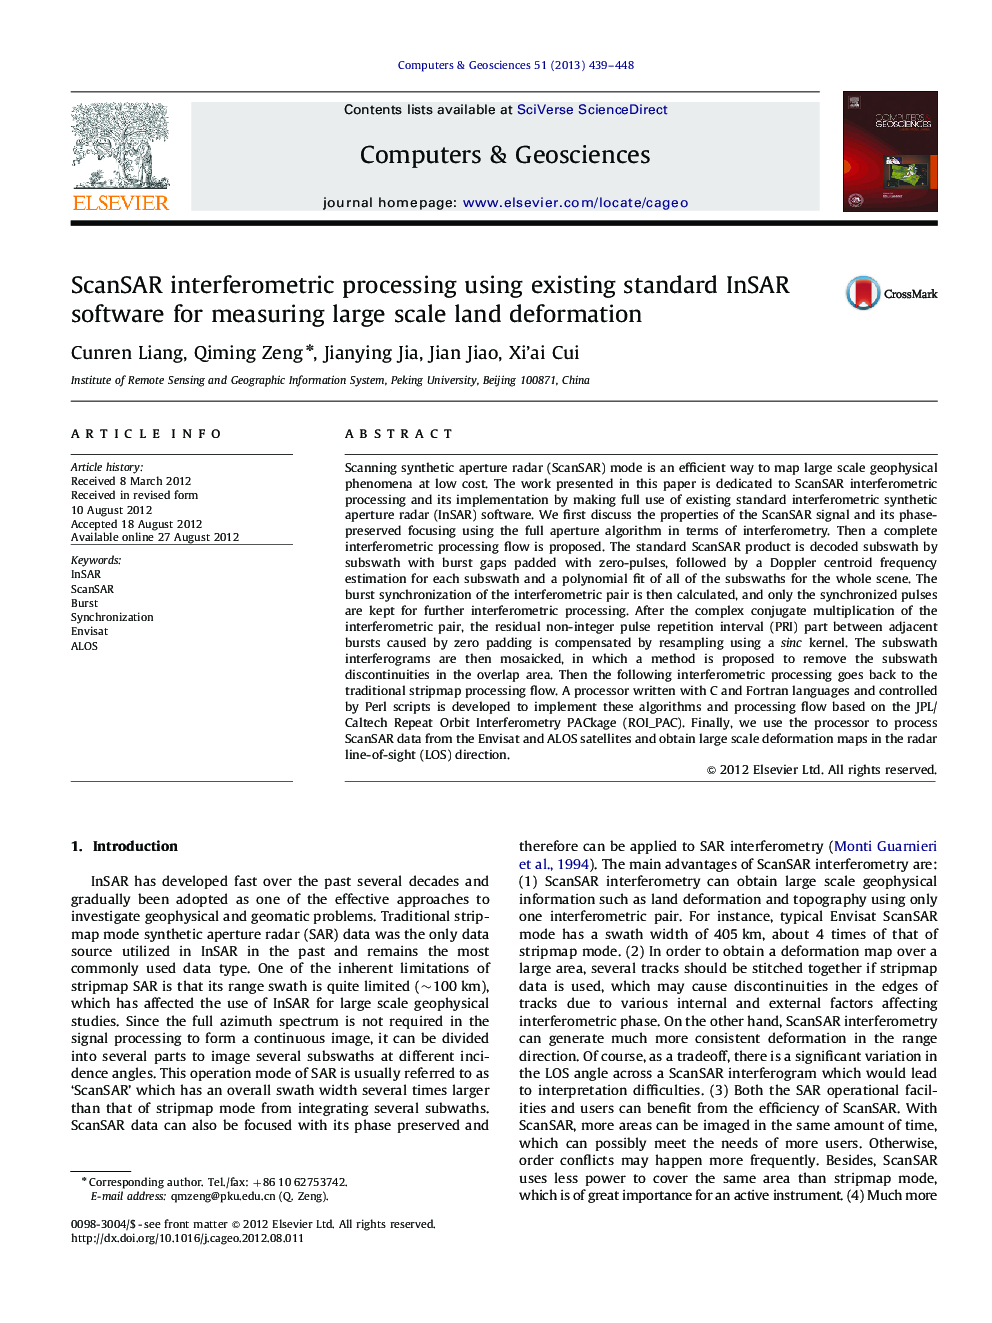 ScanSAR interferometric processing using existing standard InSAR software for measuring large scale land deformation